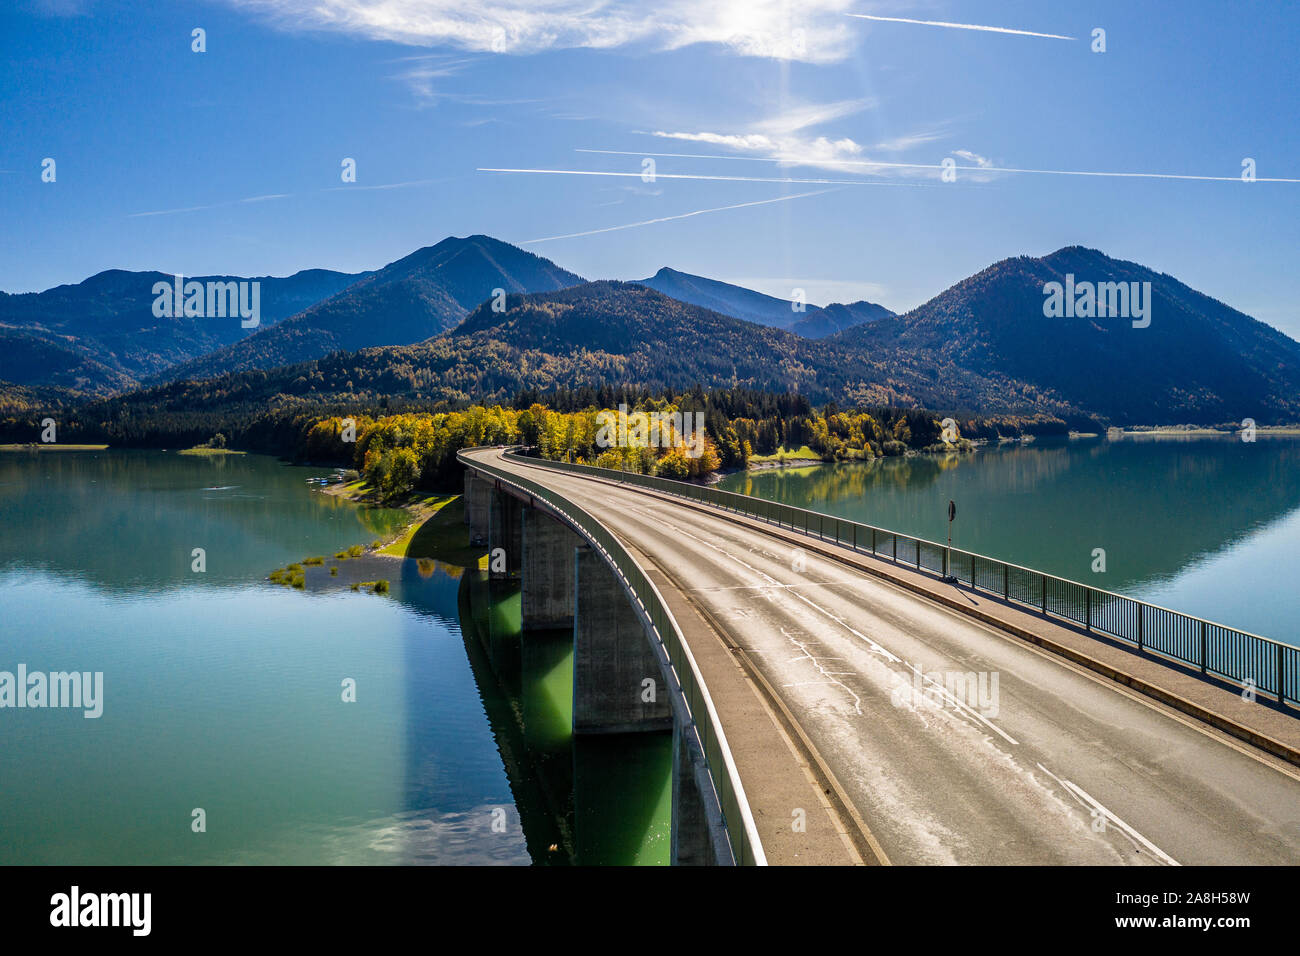 Scenic aerial view of the bridge over Lake Sylvenstein with beautiful reflections. Alps Karwendel Mountains in the back. Autumn scenery of Bavaria Stock Photo